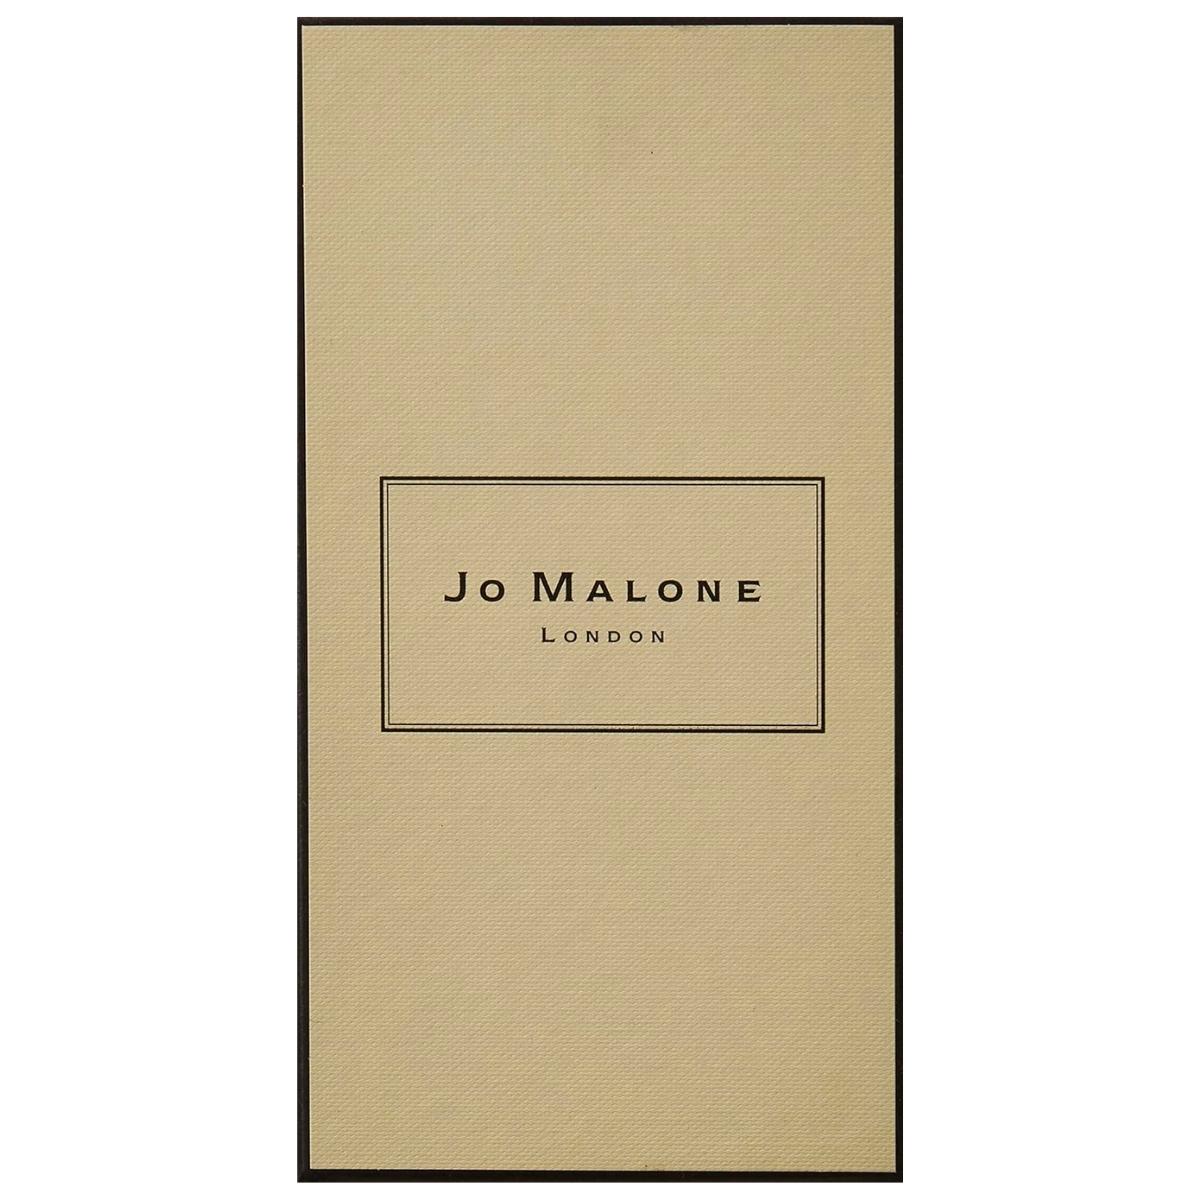 Jo Malone Red Roses Cologne Spray for Women,